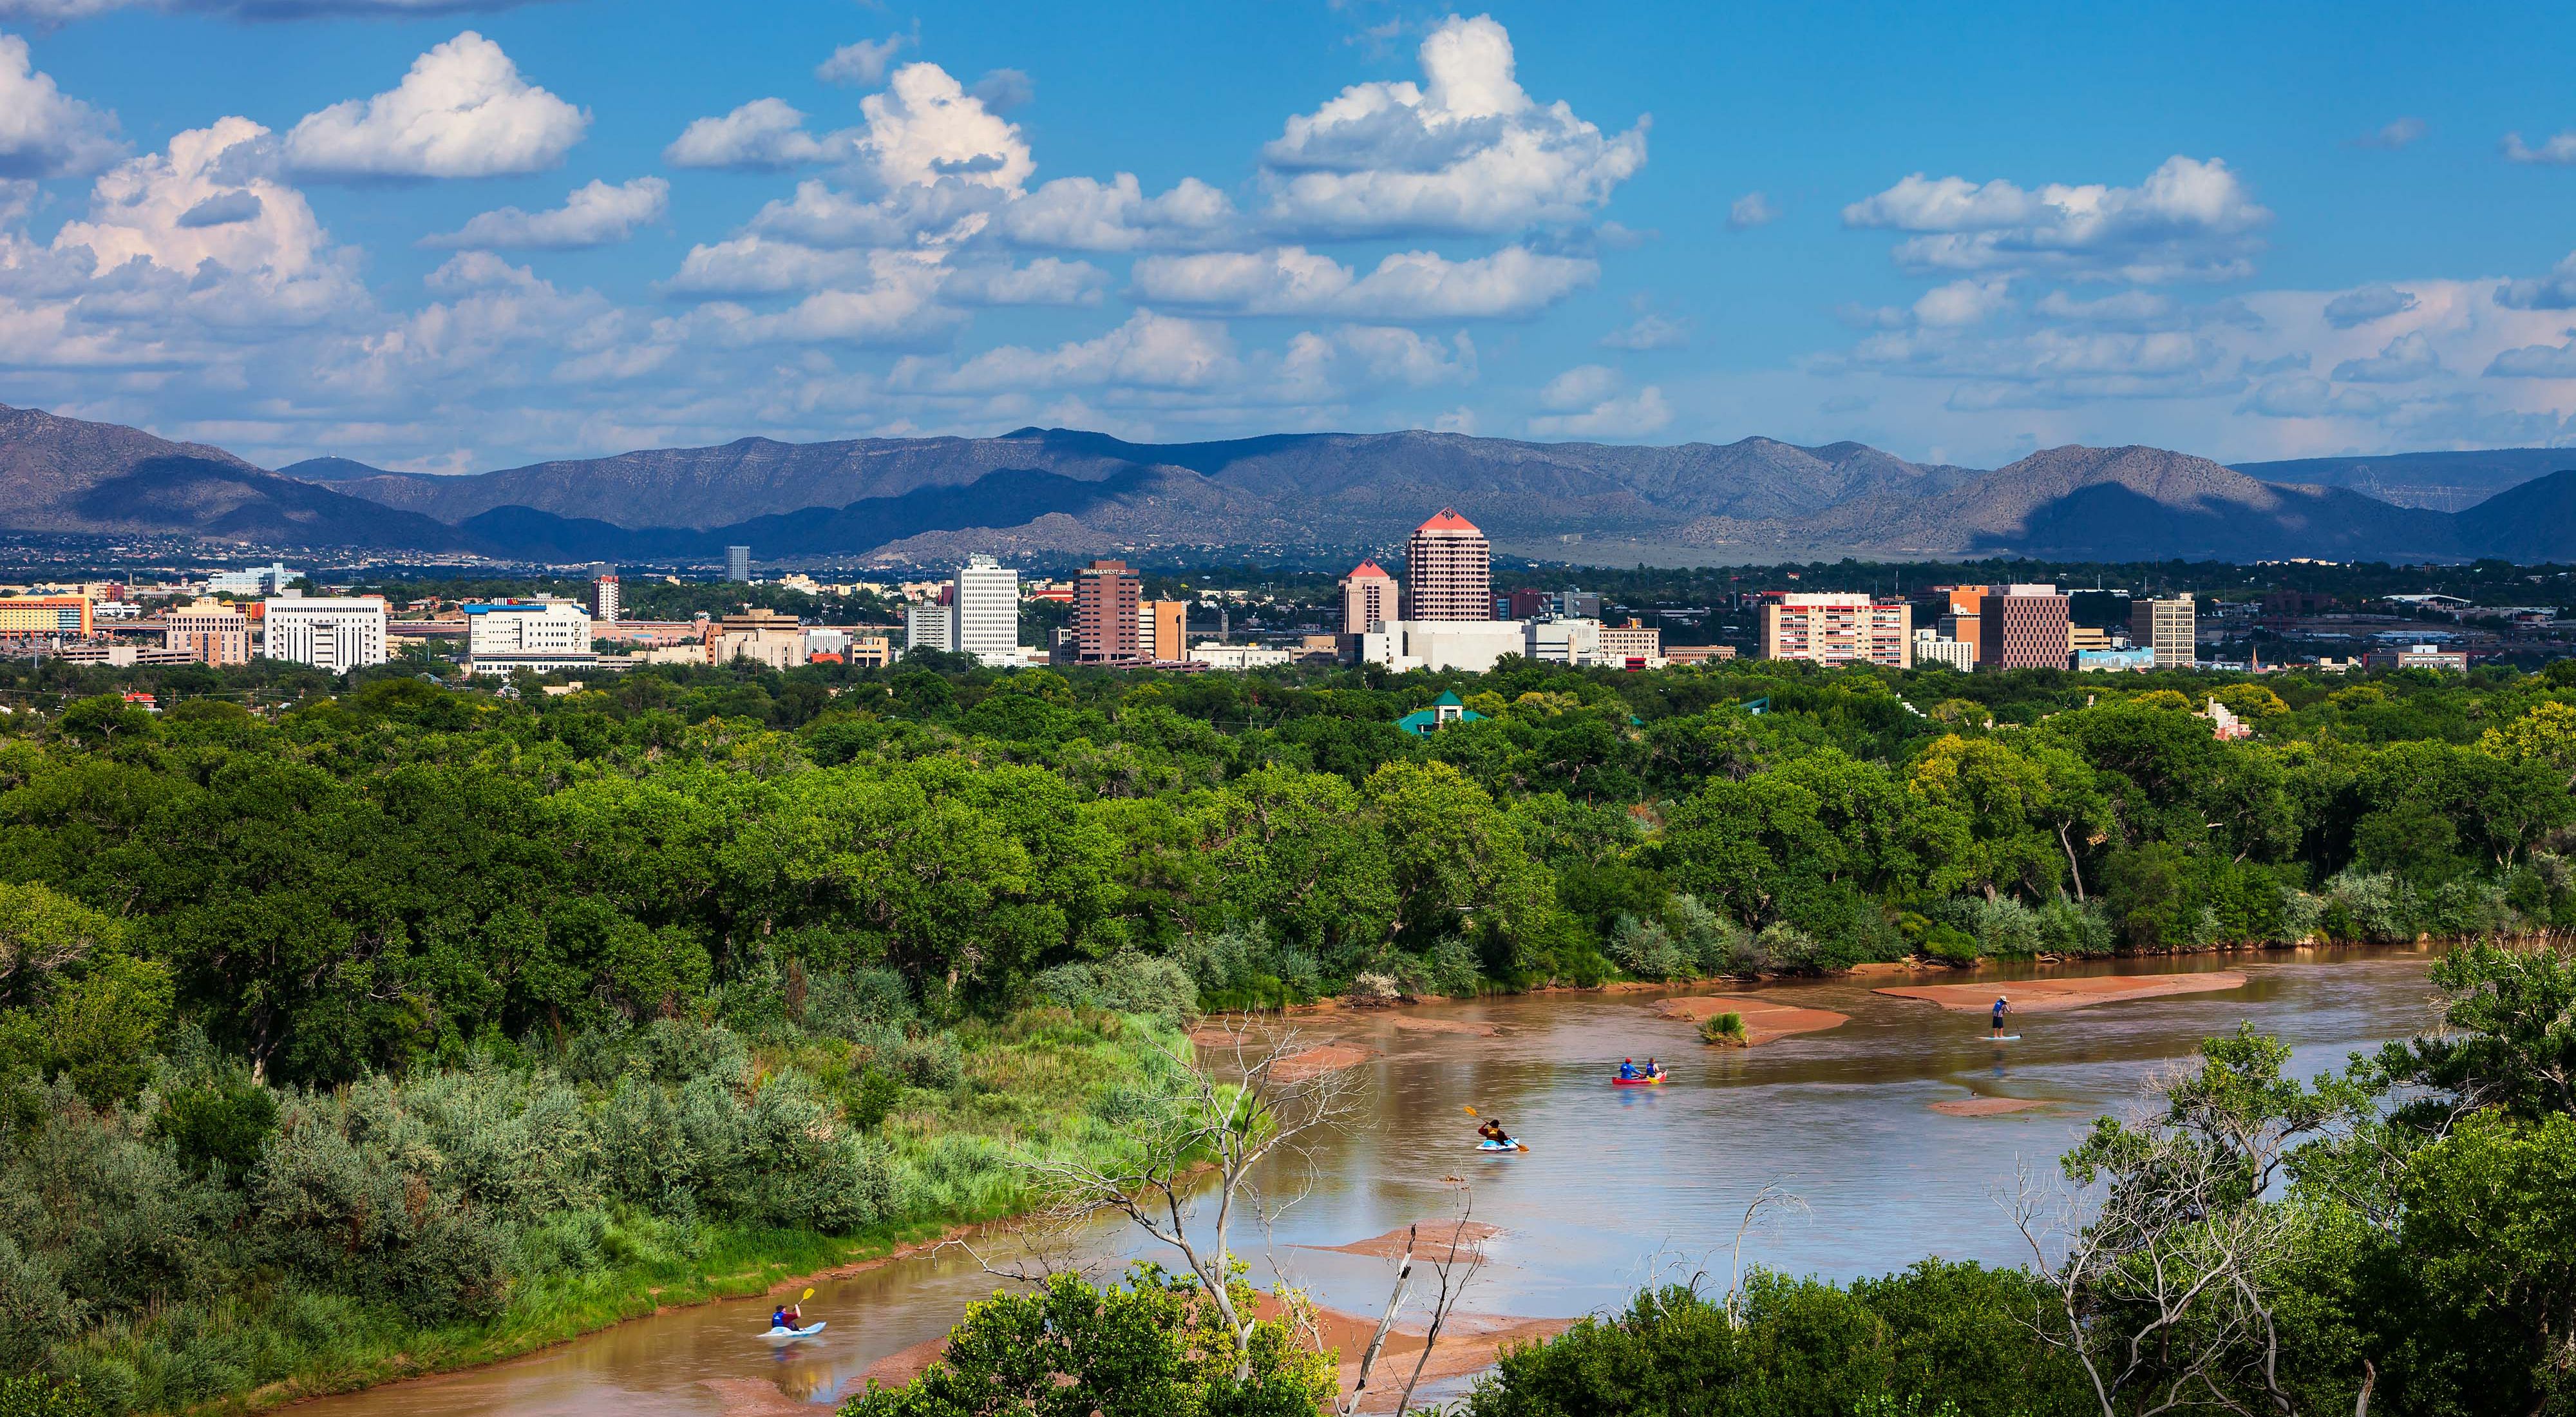 A view from a high vantage point looking over a muddy river with kayakers on it towards trees and a city skyline with mountains in the distance.